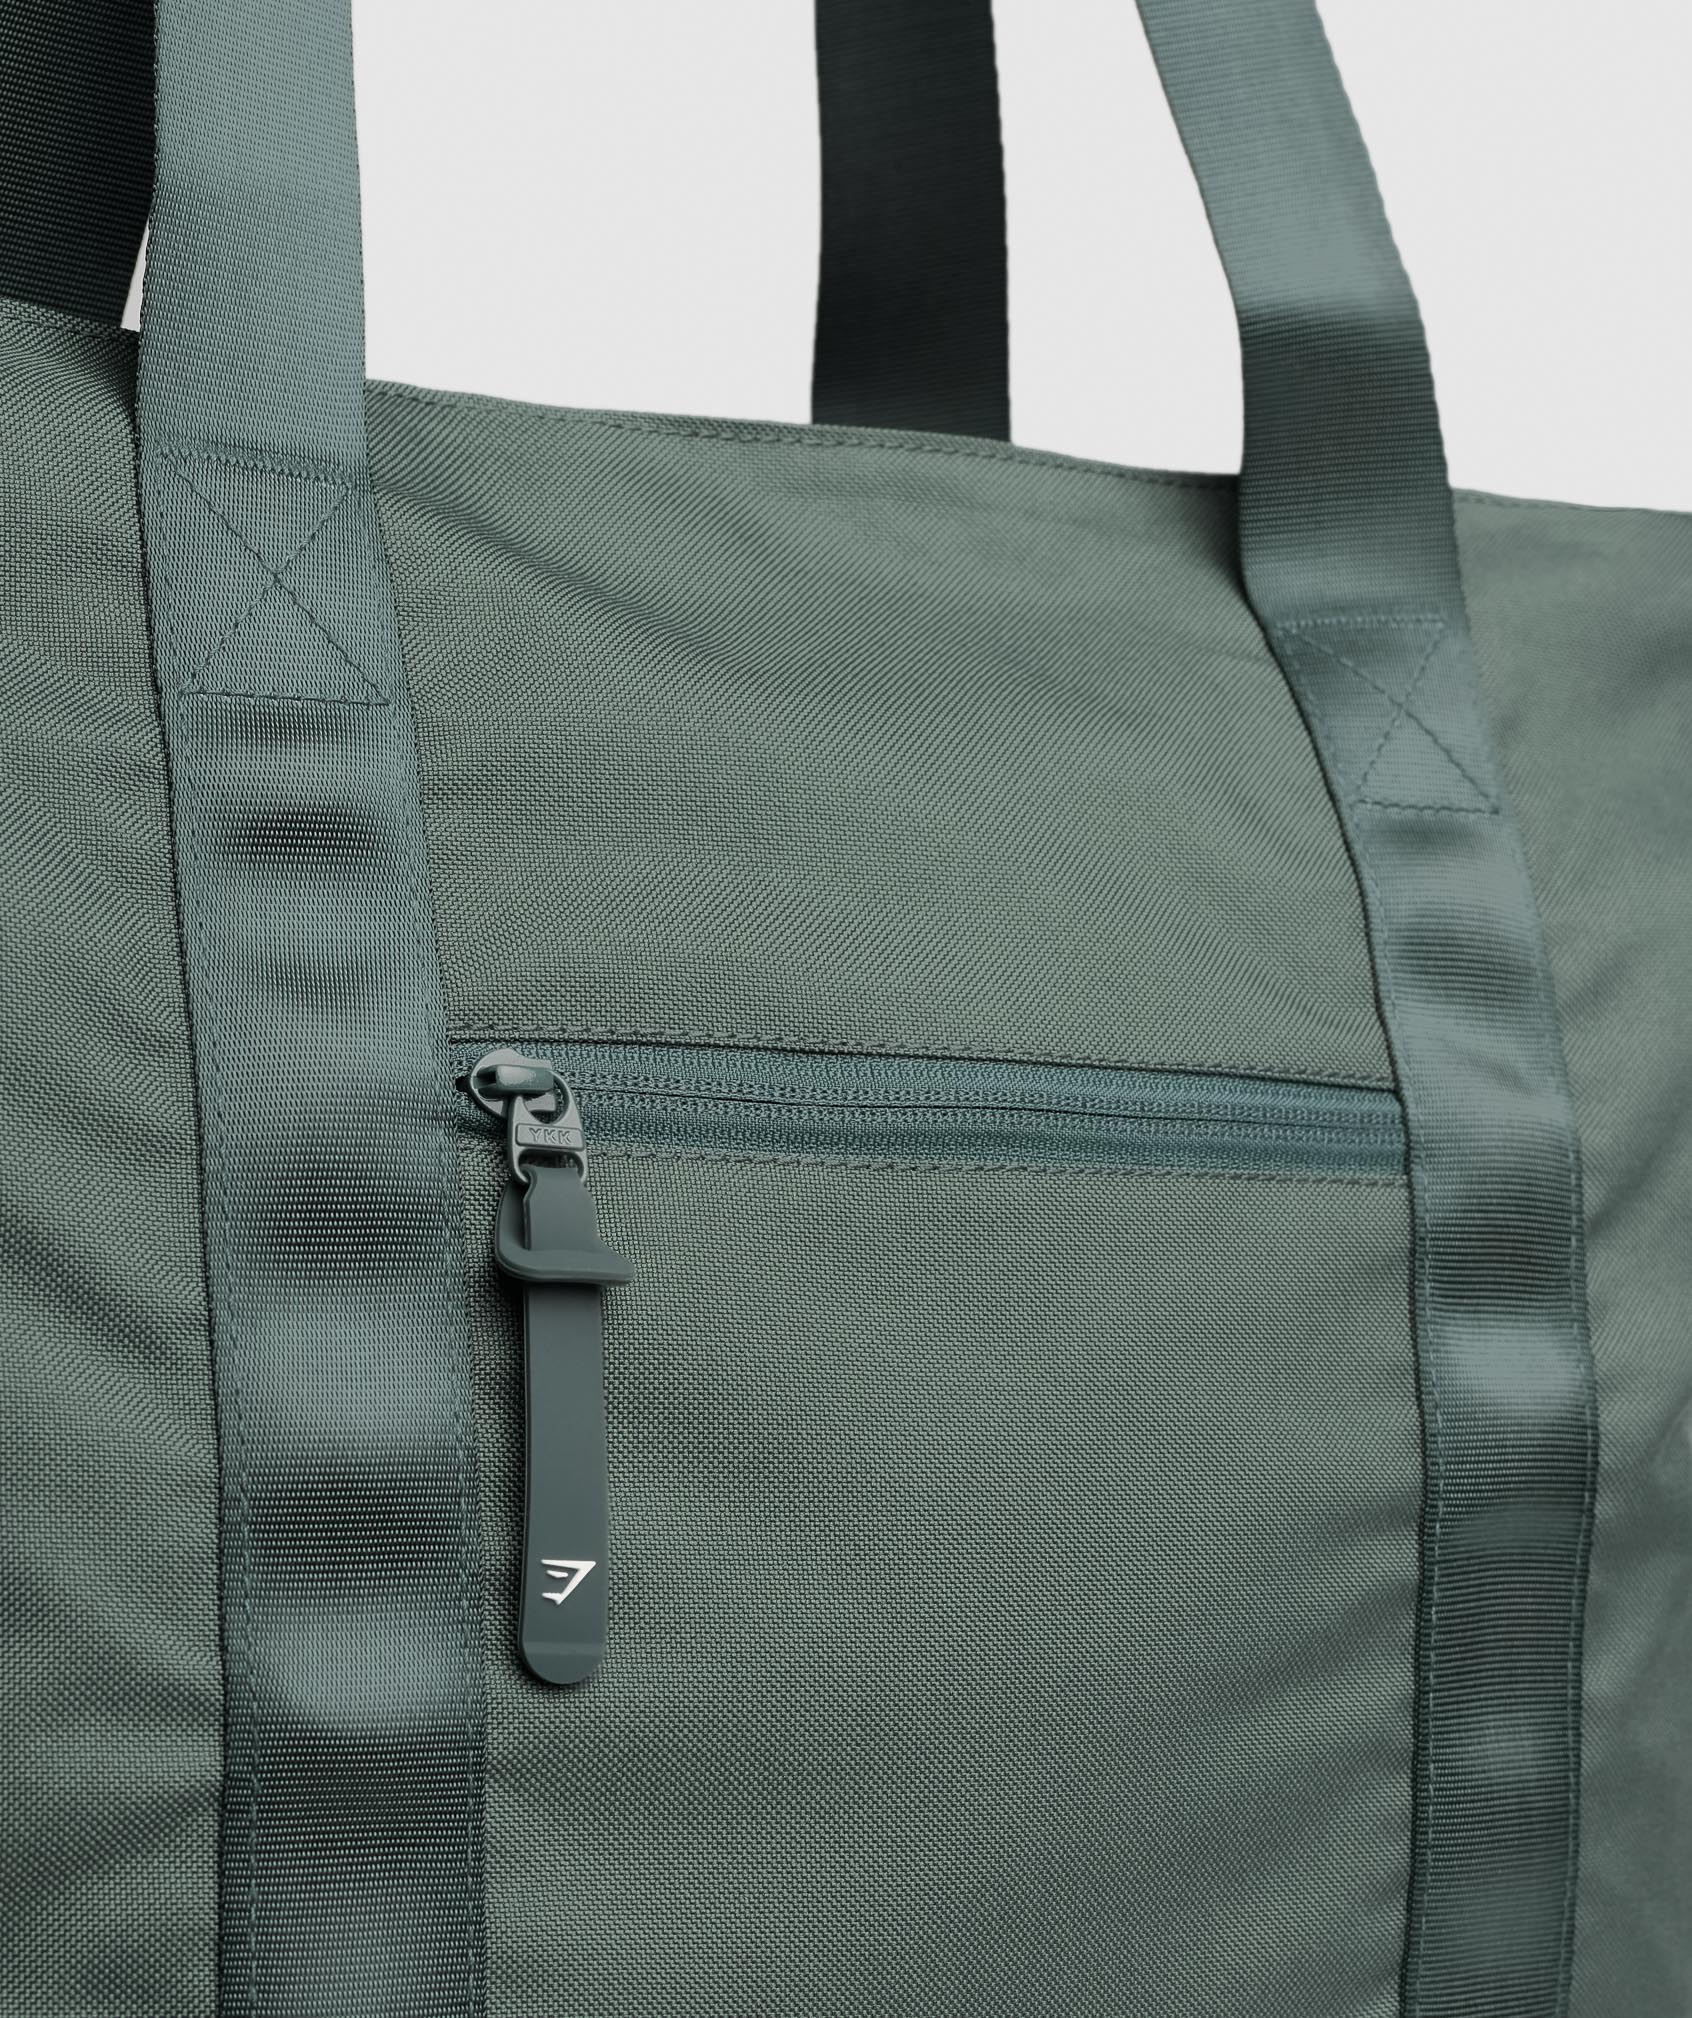 Everyday Tote in Fog  Green - view 3